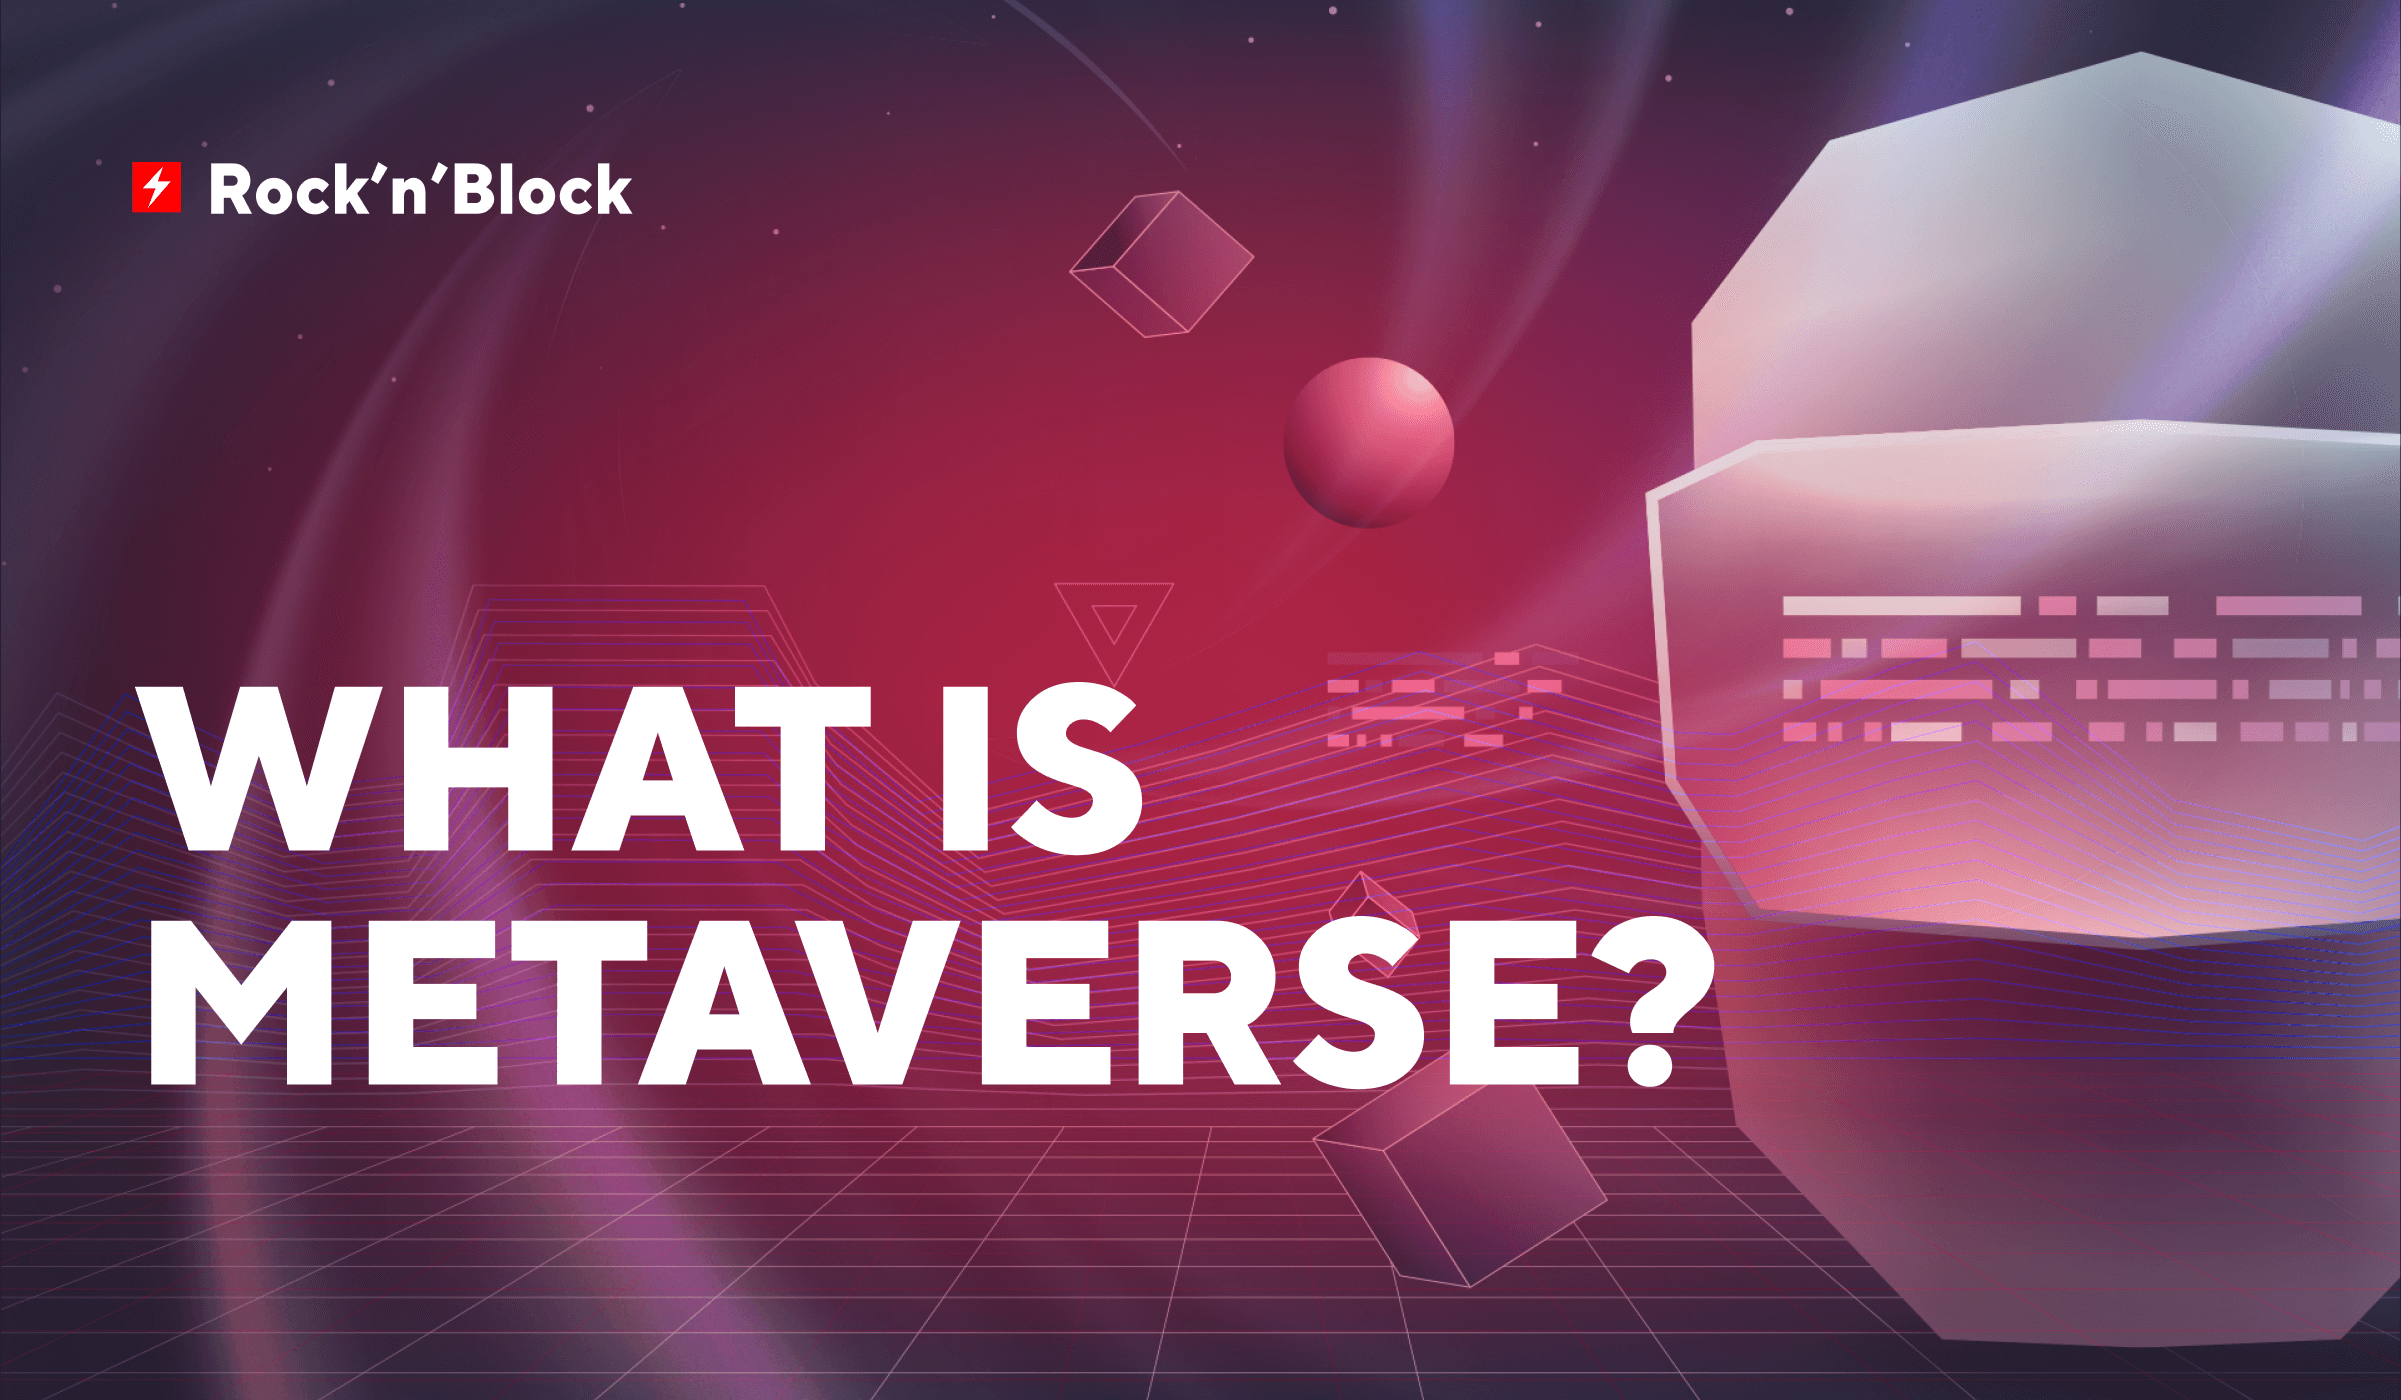 Rock'n'Block blockchain software developers are explaining what Metaverse is and why decentralized Metaverse is better than a Mark Zuckerberg's one